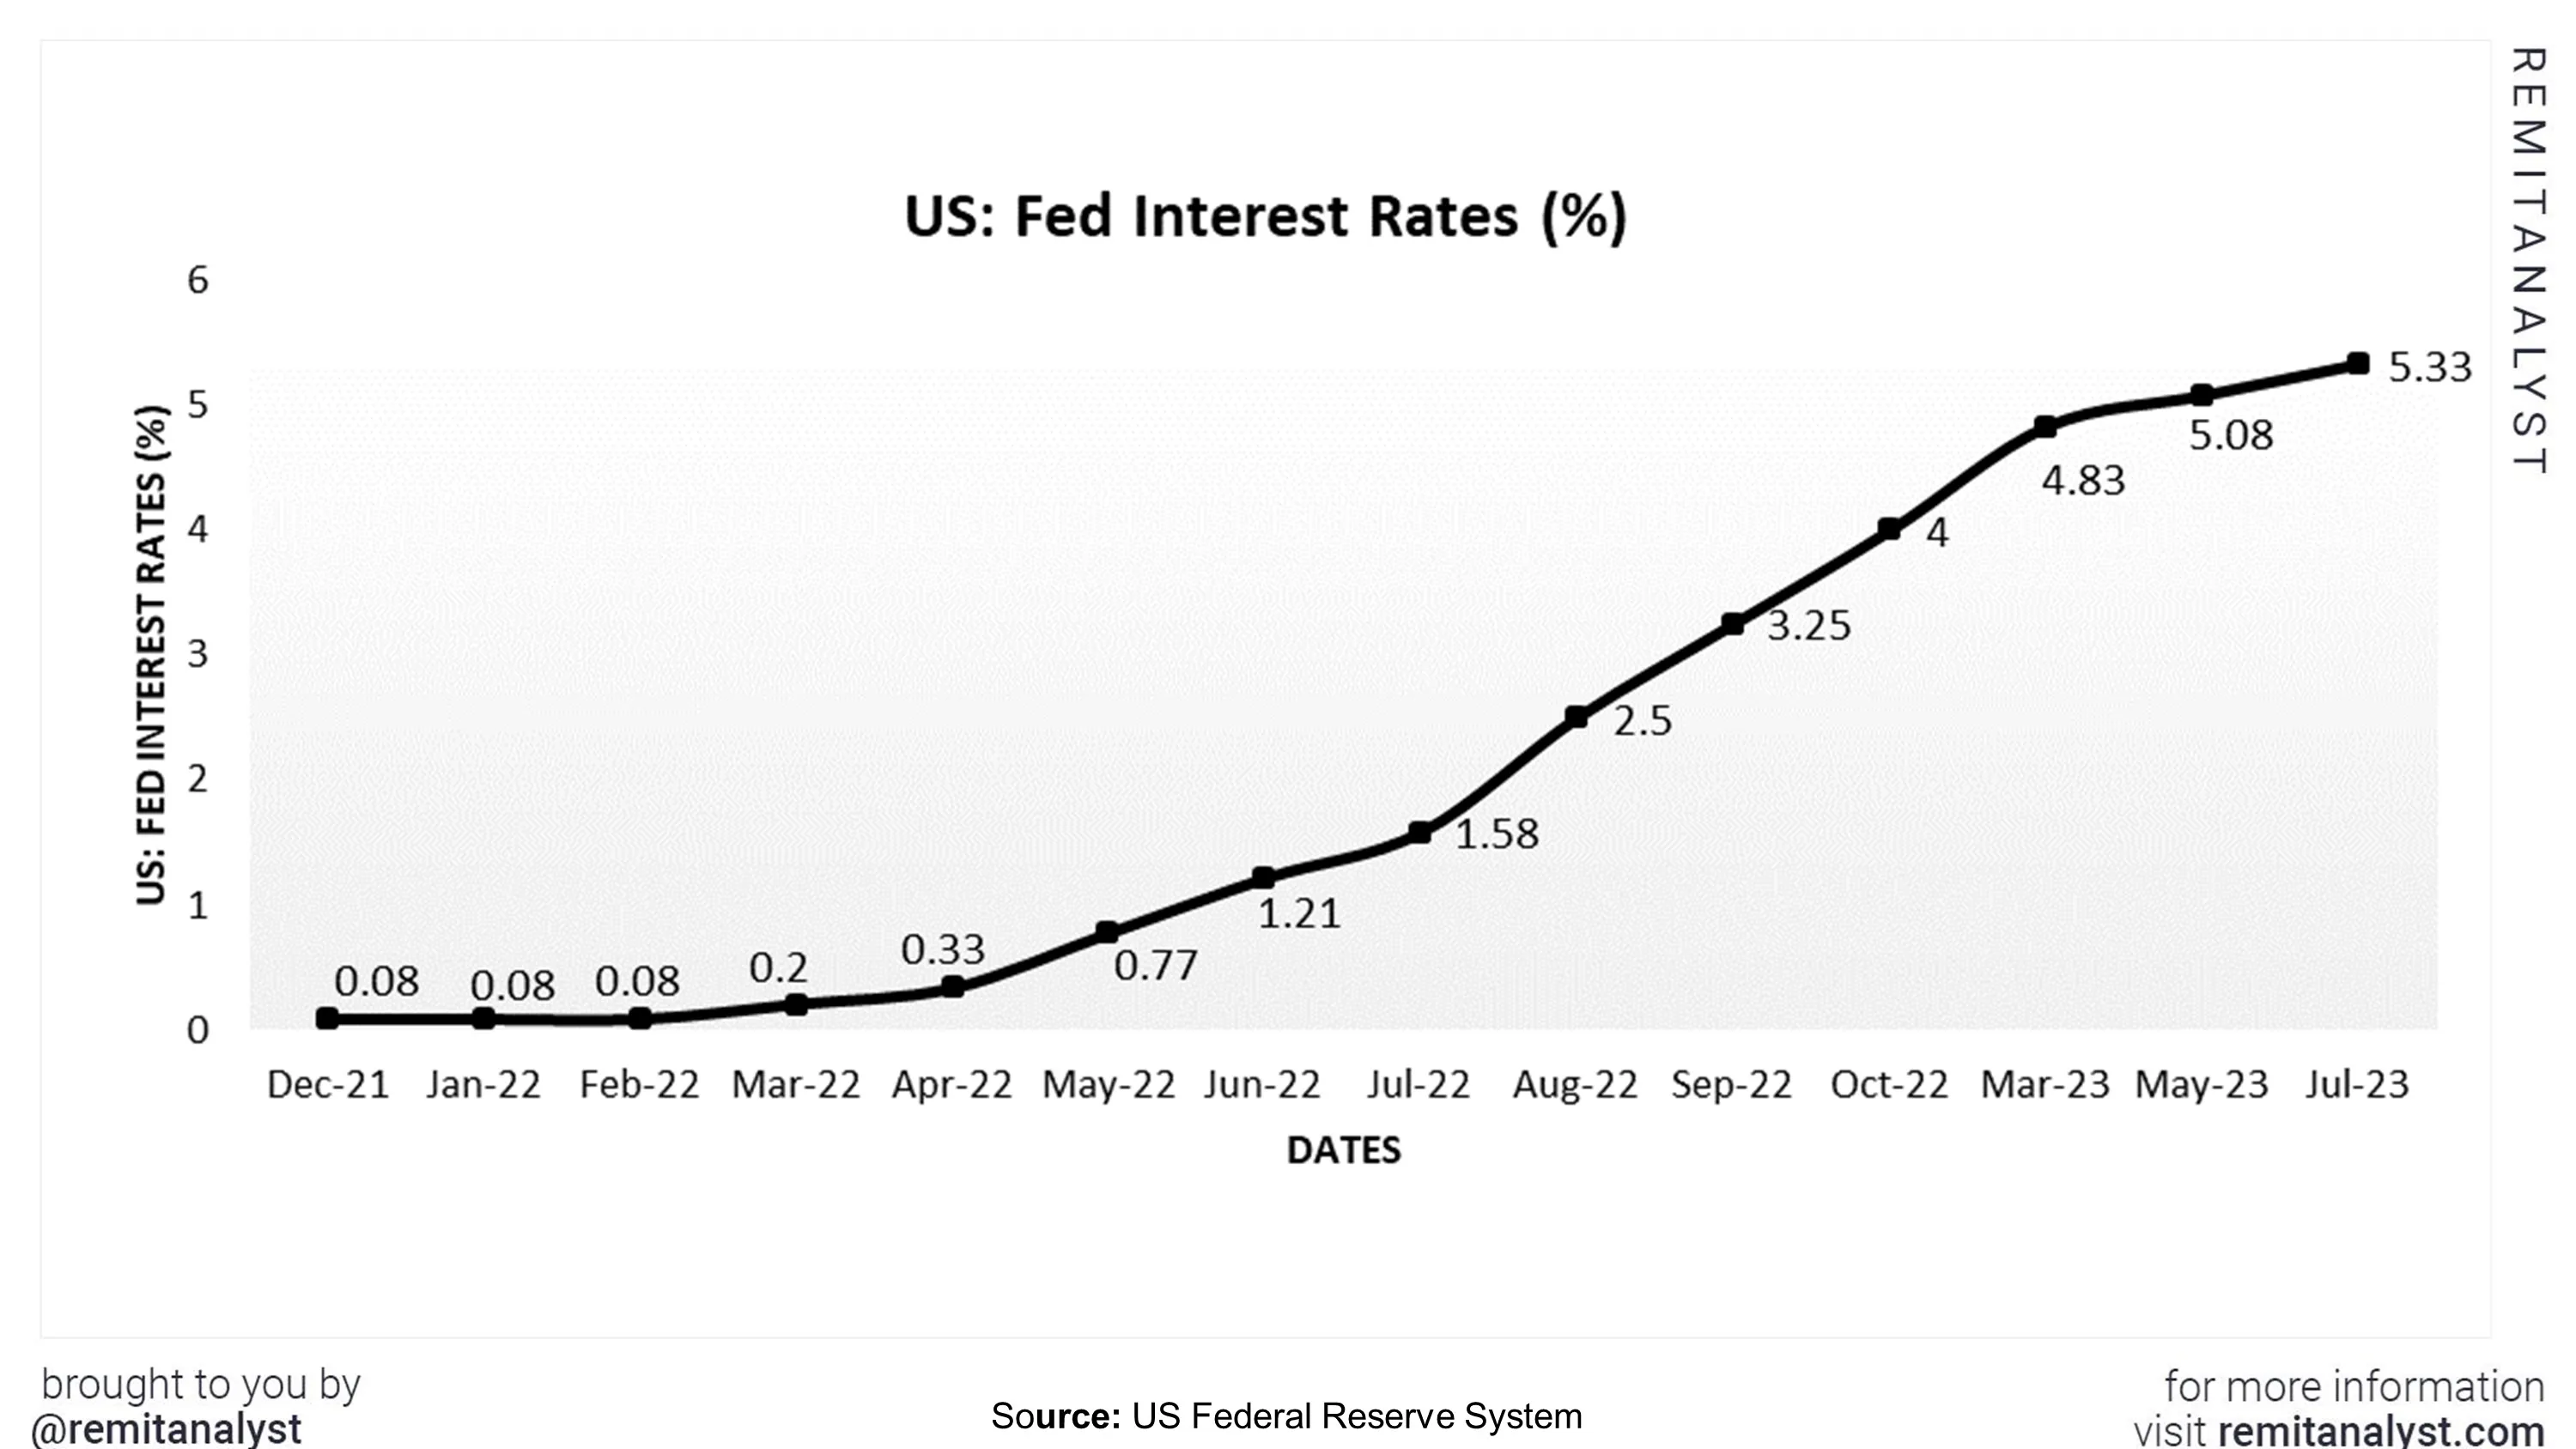 interest-rates-in-us-from-dec-2021-to-jul-2023